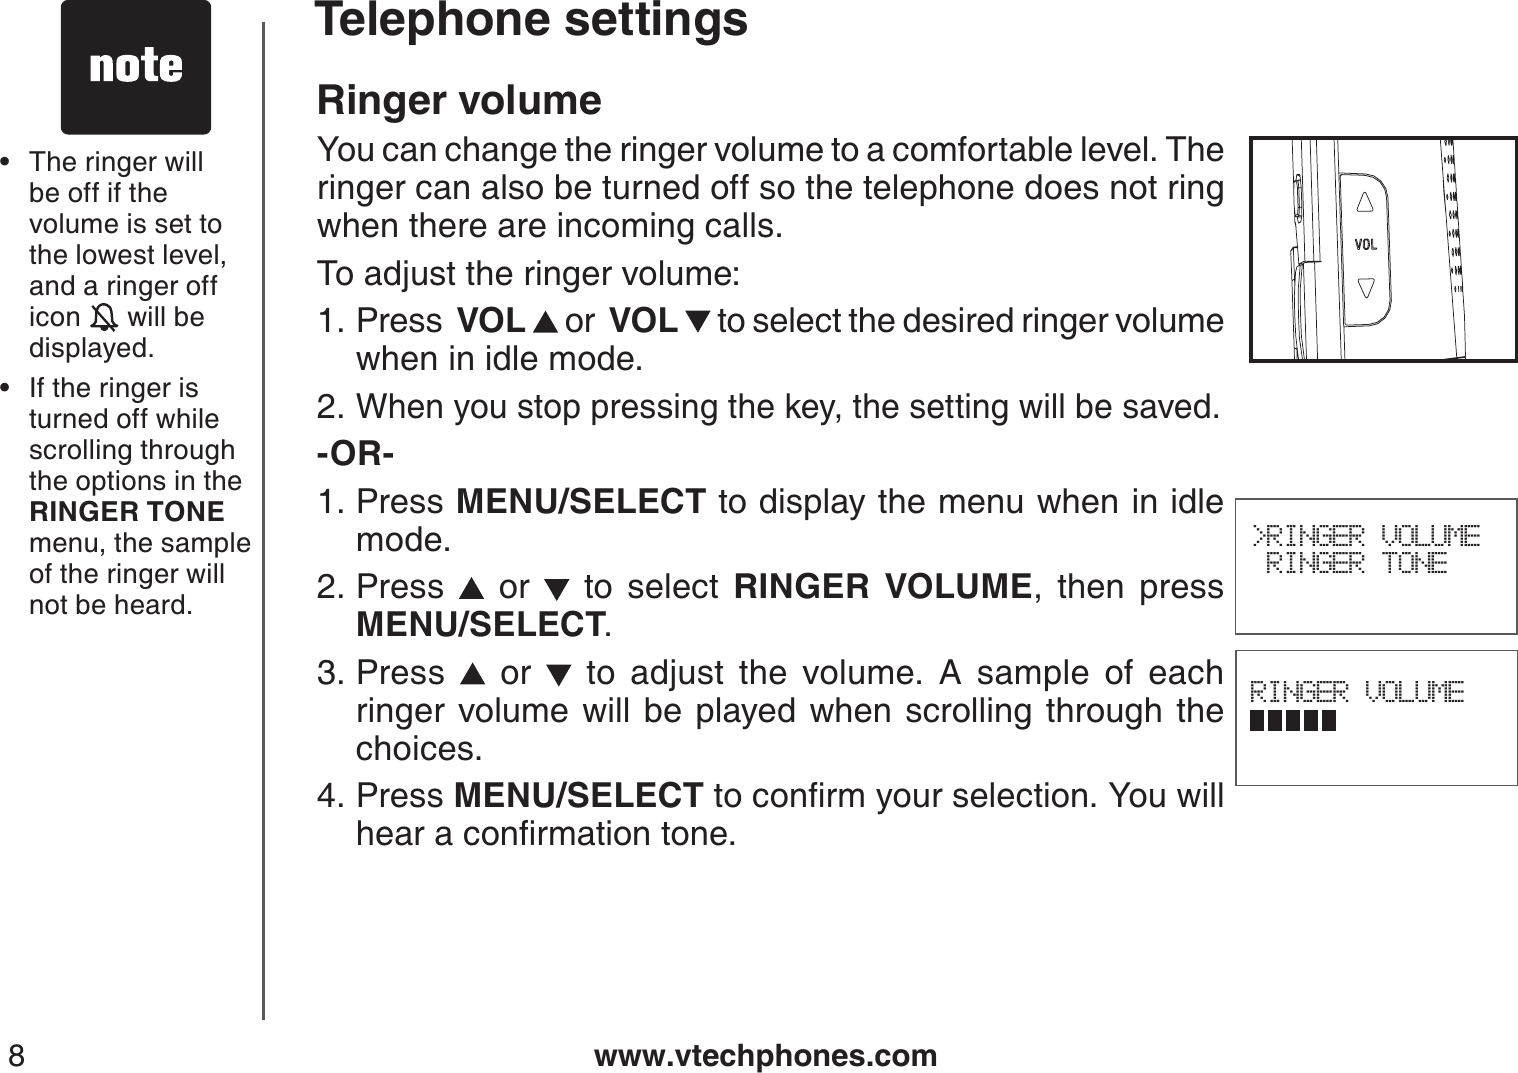 www.vtechphones.com8Ringer volumeYou can change the ringer volume to a comfortable level. The ringer can also be turned off so the telephone does not ring when there are incoming calls.To adjust the ringer volume:Press  VOL  or  VOL  to select the desired ringer volume when in idle mode.When you stop pressing the key, the setting will be saved.-OR-Press MENU/SELECT to display the menu when in idle mode.Press   or   to select RINGER VOLUME, then press           MENU/SELECT.Press   or   to adjust the volume. A sample of each ringer volume will be played when scrolling through the choices.Press MENU/SELECTVQEQPſTO[QWTUGNGEVKQP;QWYKNNJGCTCEQPſTOCVKQPVQPG1.2.1.2.3.4.RINGER VOLUME&gt;RINGER VOLUME RINGER TONE The ringer will be off if the volume is set to the lowest level, and a ringer off icon   will be displayed.If the ringer isturned off while scrolling through the options in the RINGER TONE menu, the sample of the ringer will not be heard.••Telephone settings